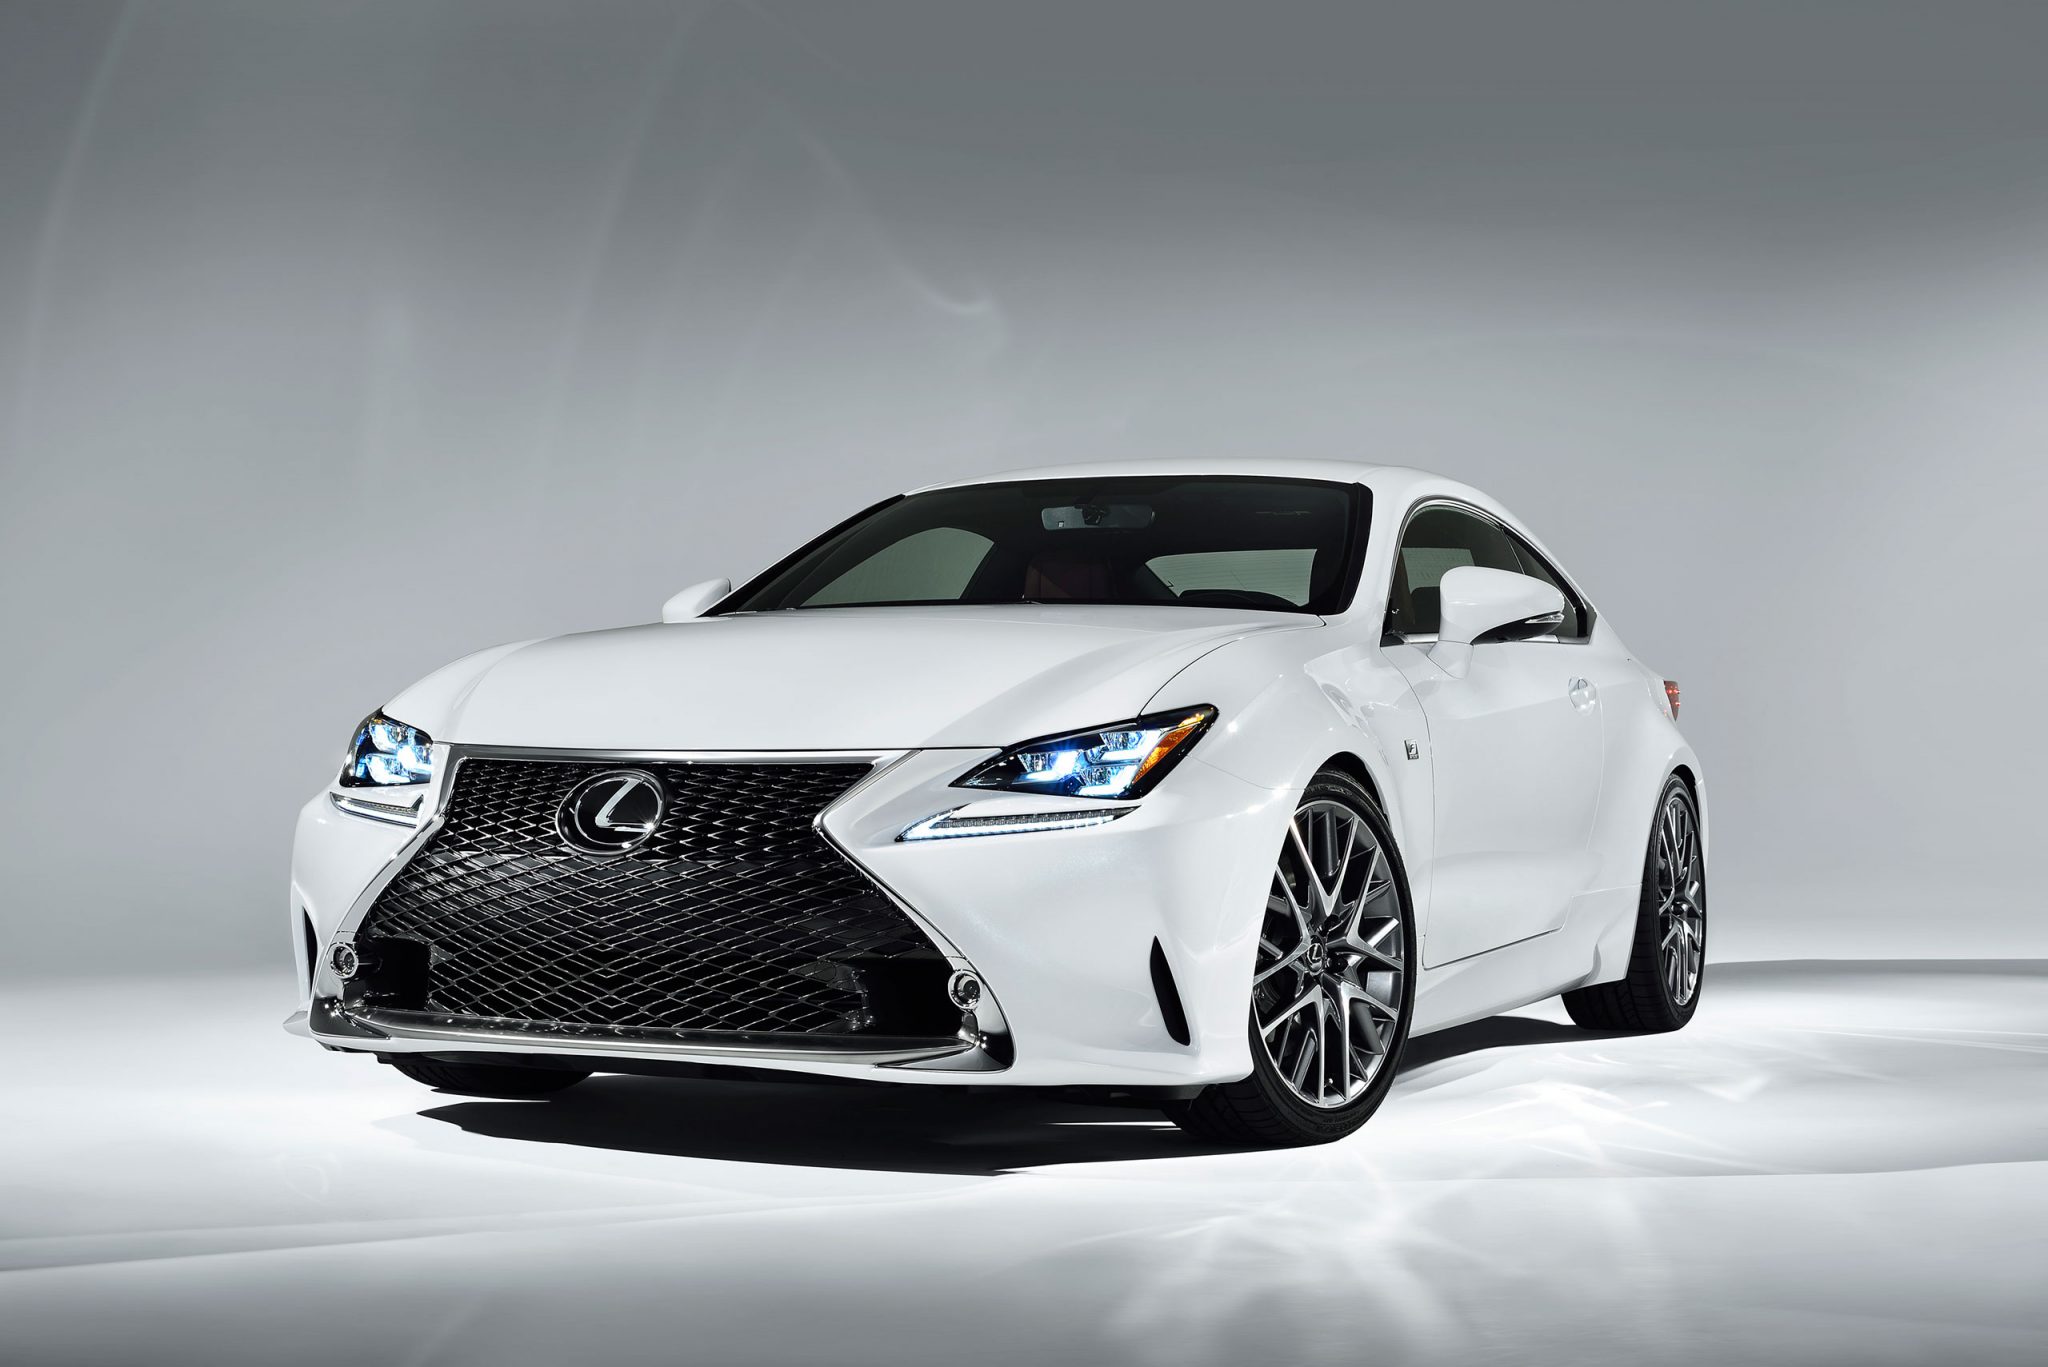 Lexus Cars News RC 350 F Sport officially revealed